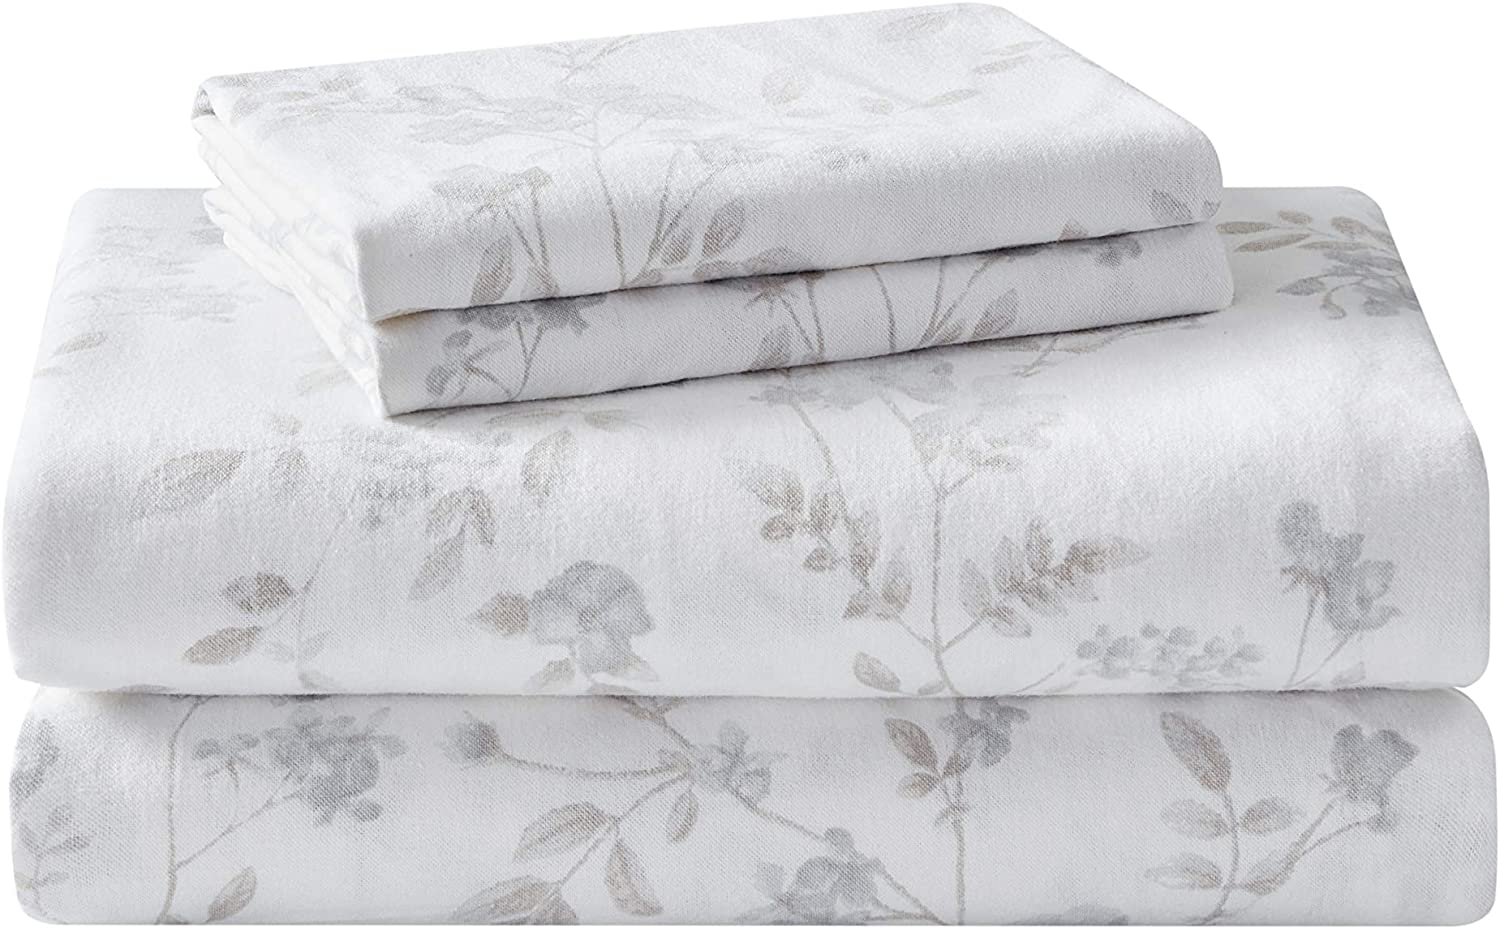 Details about   Laura Ashley HomeFlannel Collection Cotton Bedding Sheet Set Pre-Shrunk & Br 